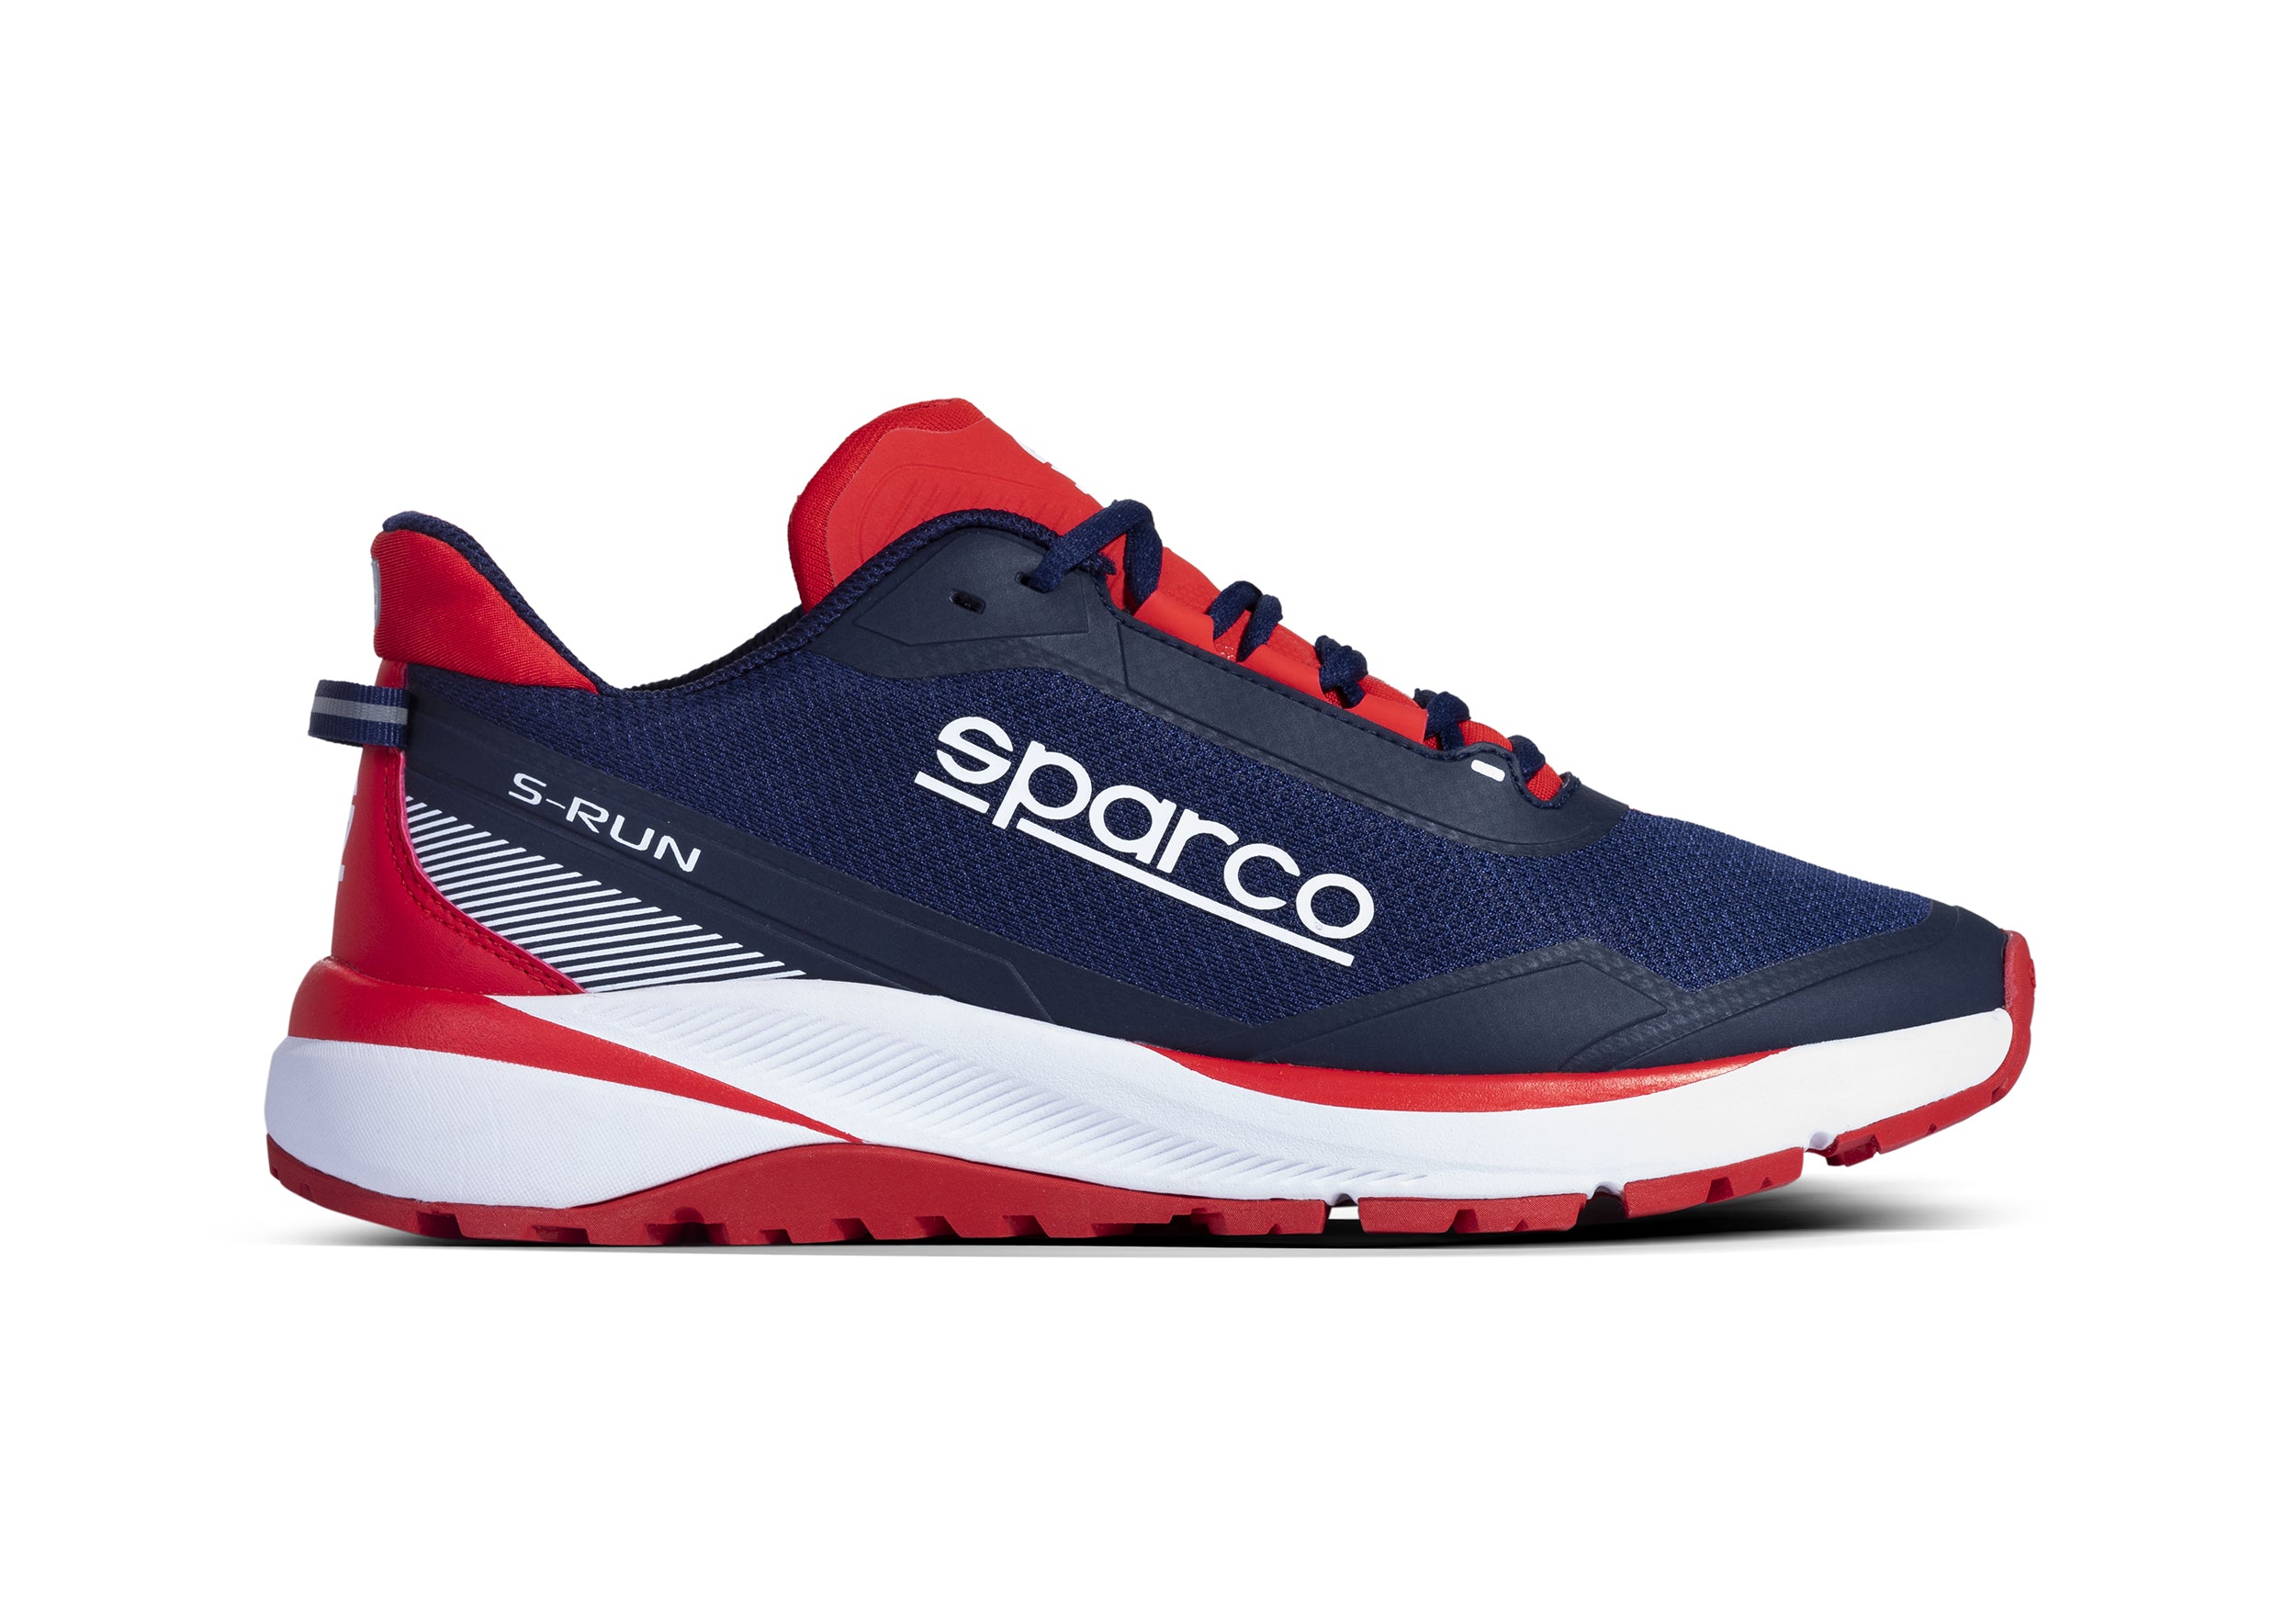 SPARCO 0012A544BMRS S-RUN Shoes, navy blue/red, size 44 Photo-0 